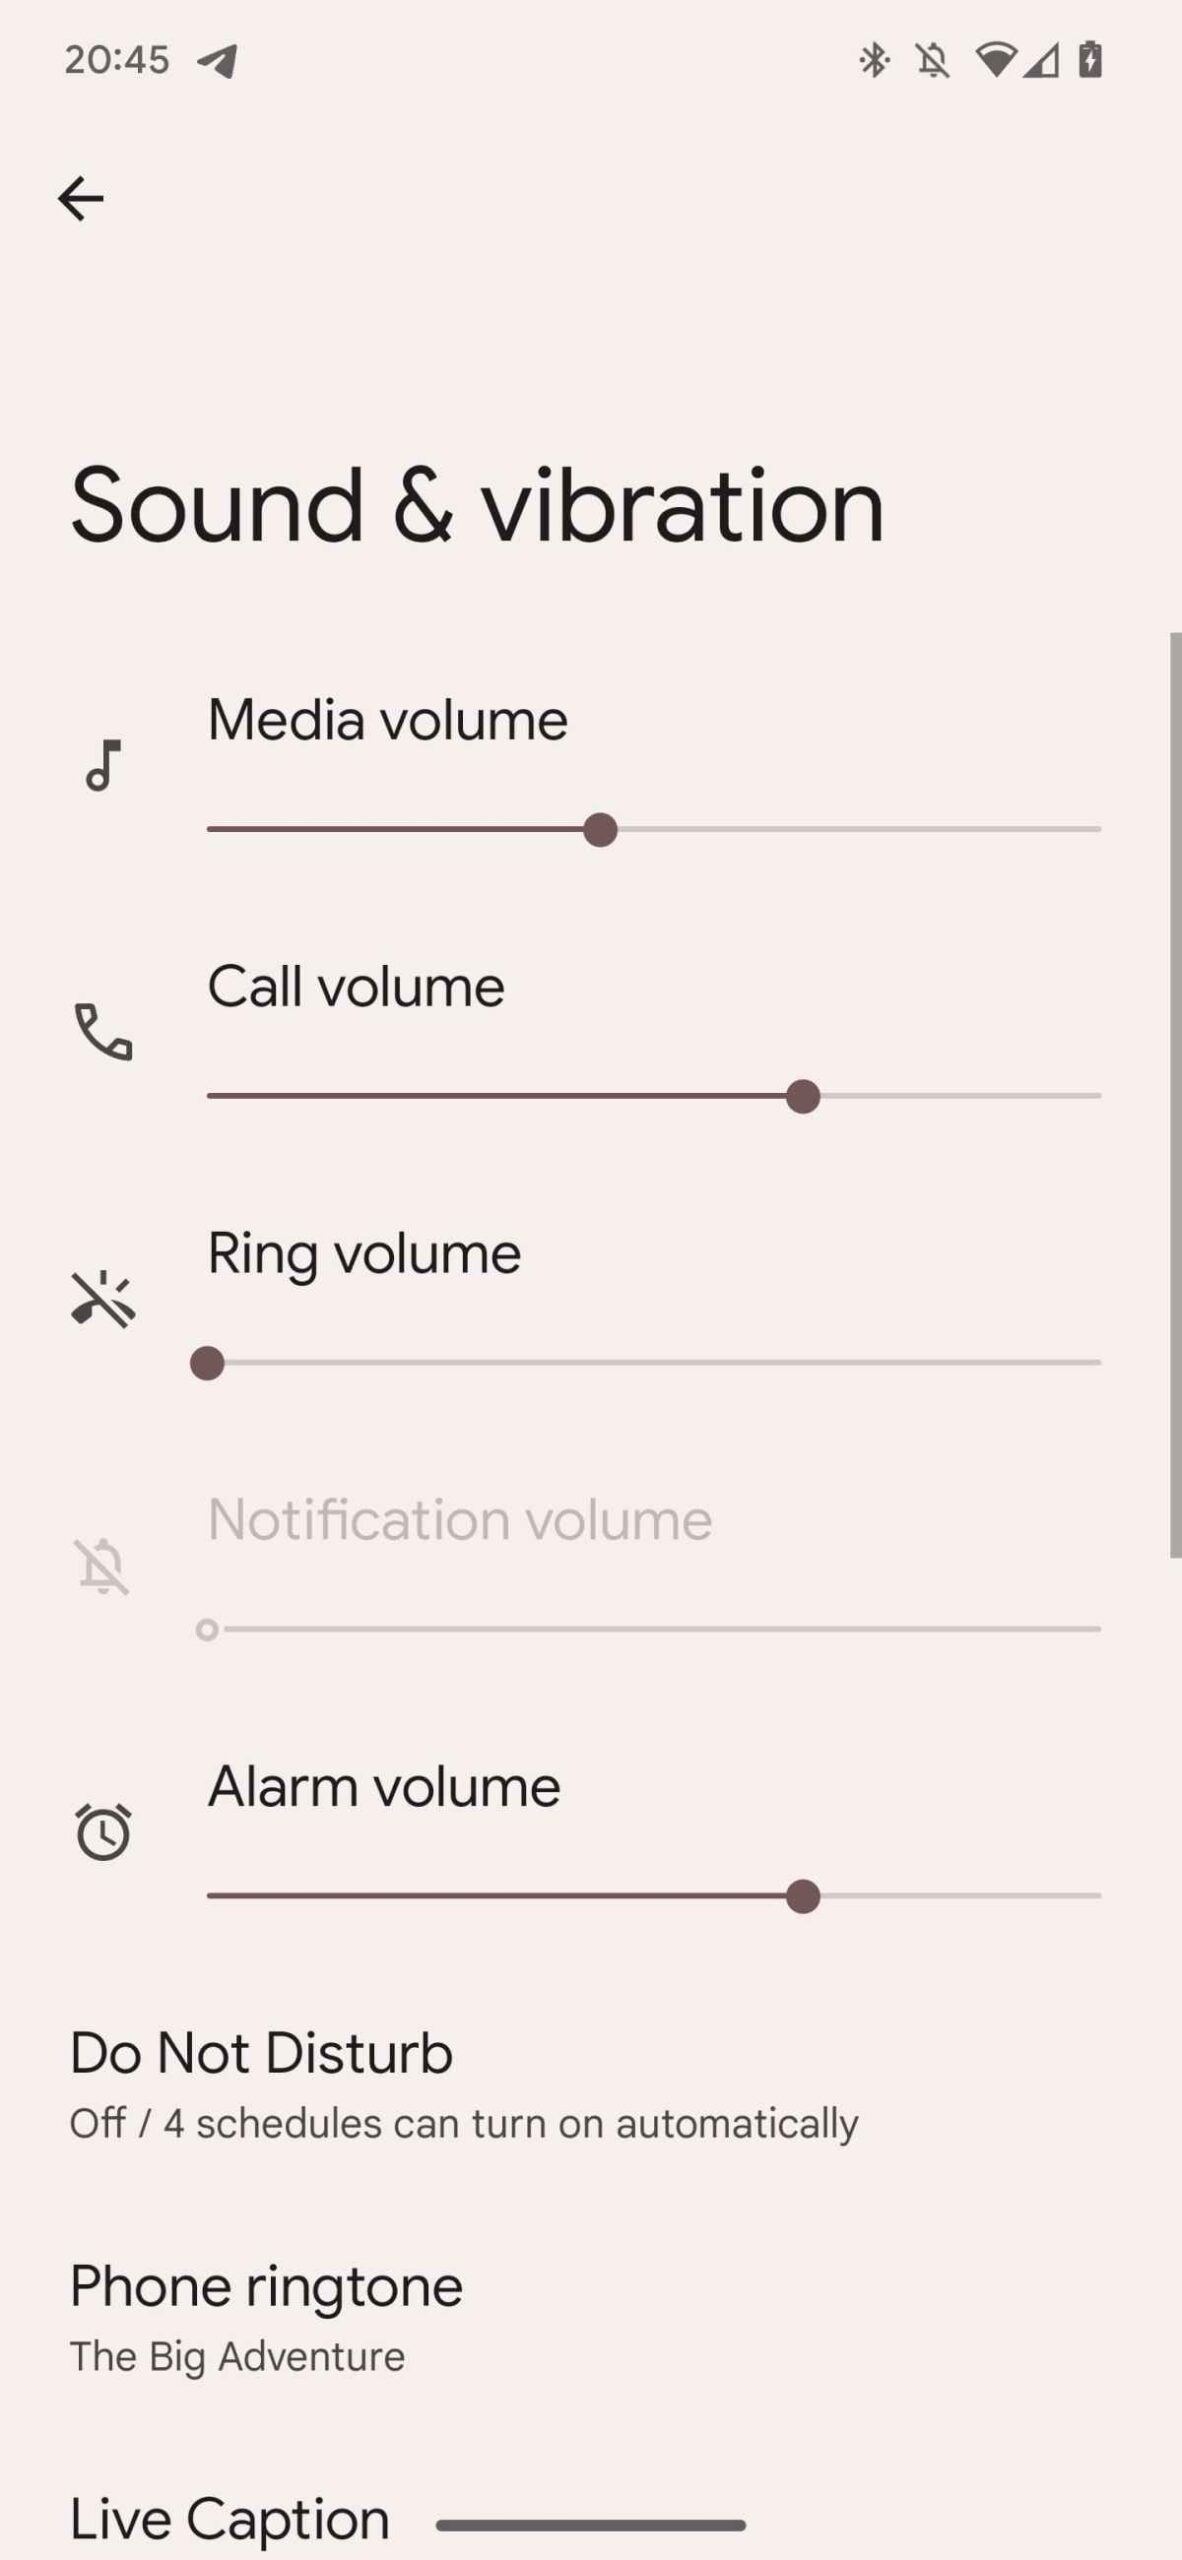 Google to separate Ringing volume and notification in an upcoming update